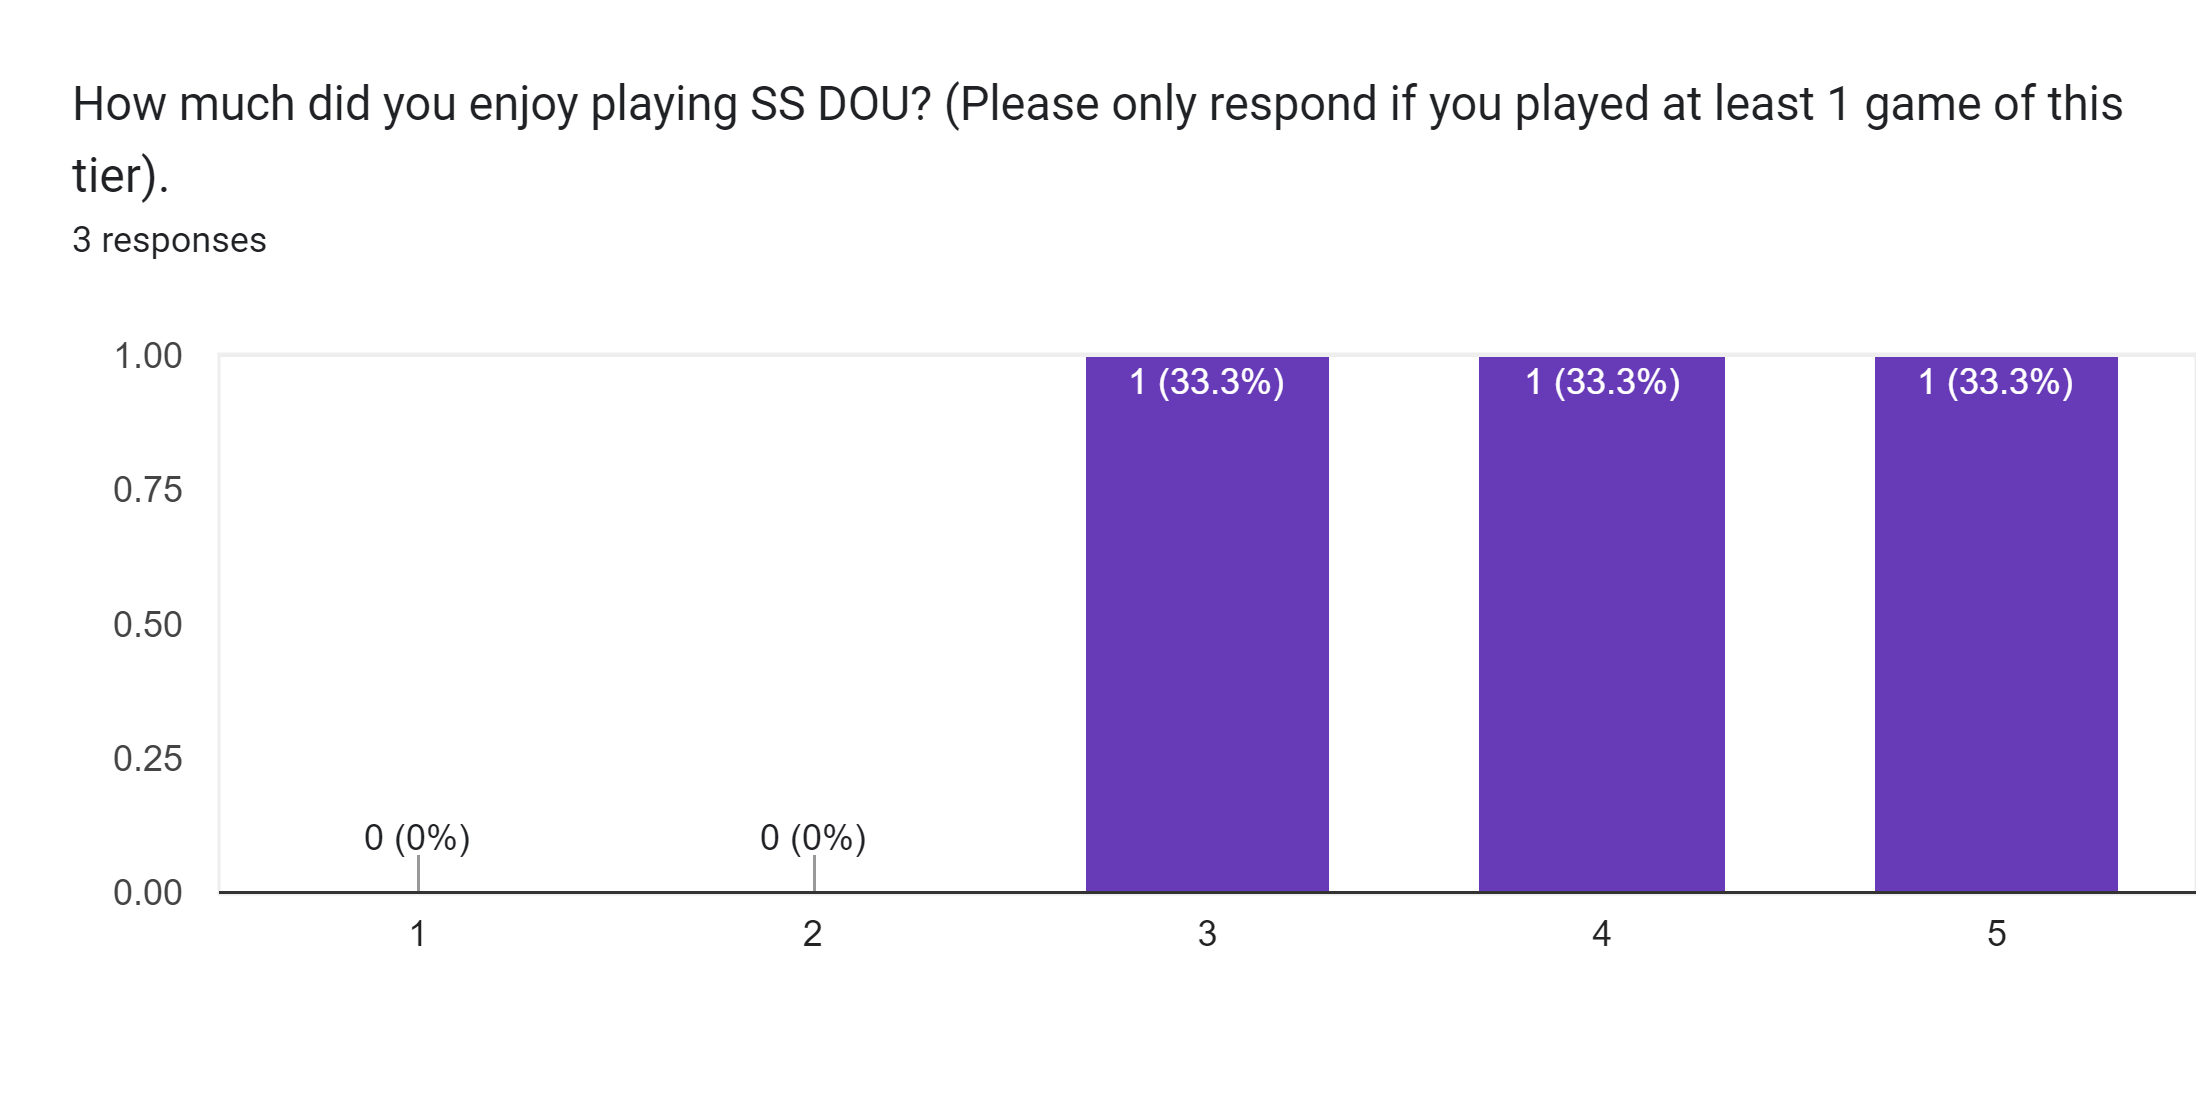 Forms response chart. Question title: How much did you enjoy playing SS DOU? (Please only respond if you played at least 1 game of this tier).. Number of responses: 3 responses.